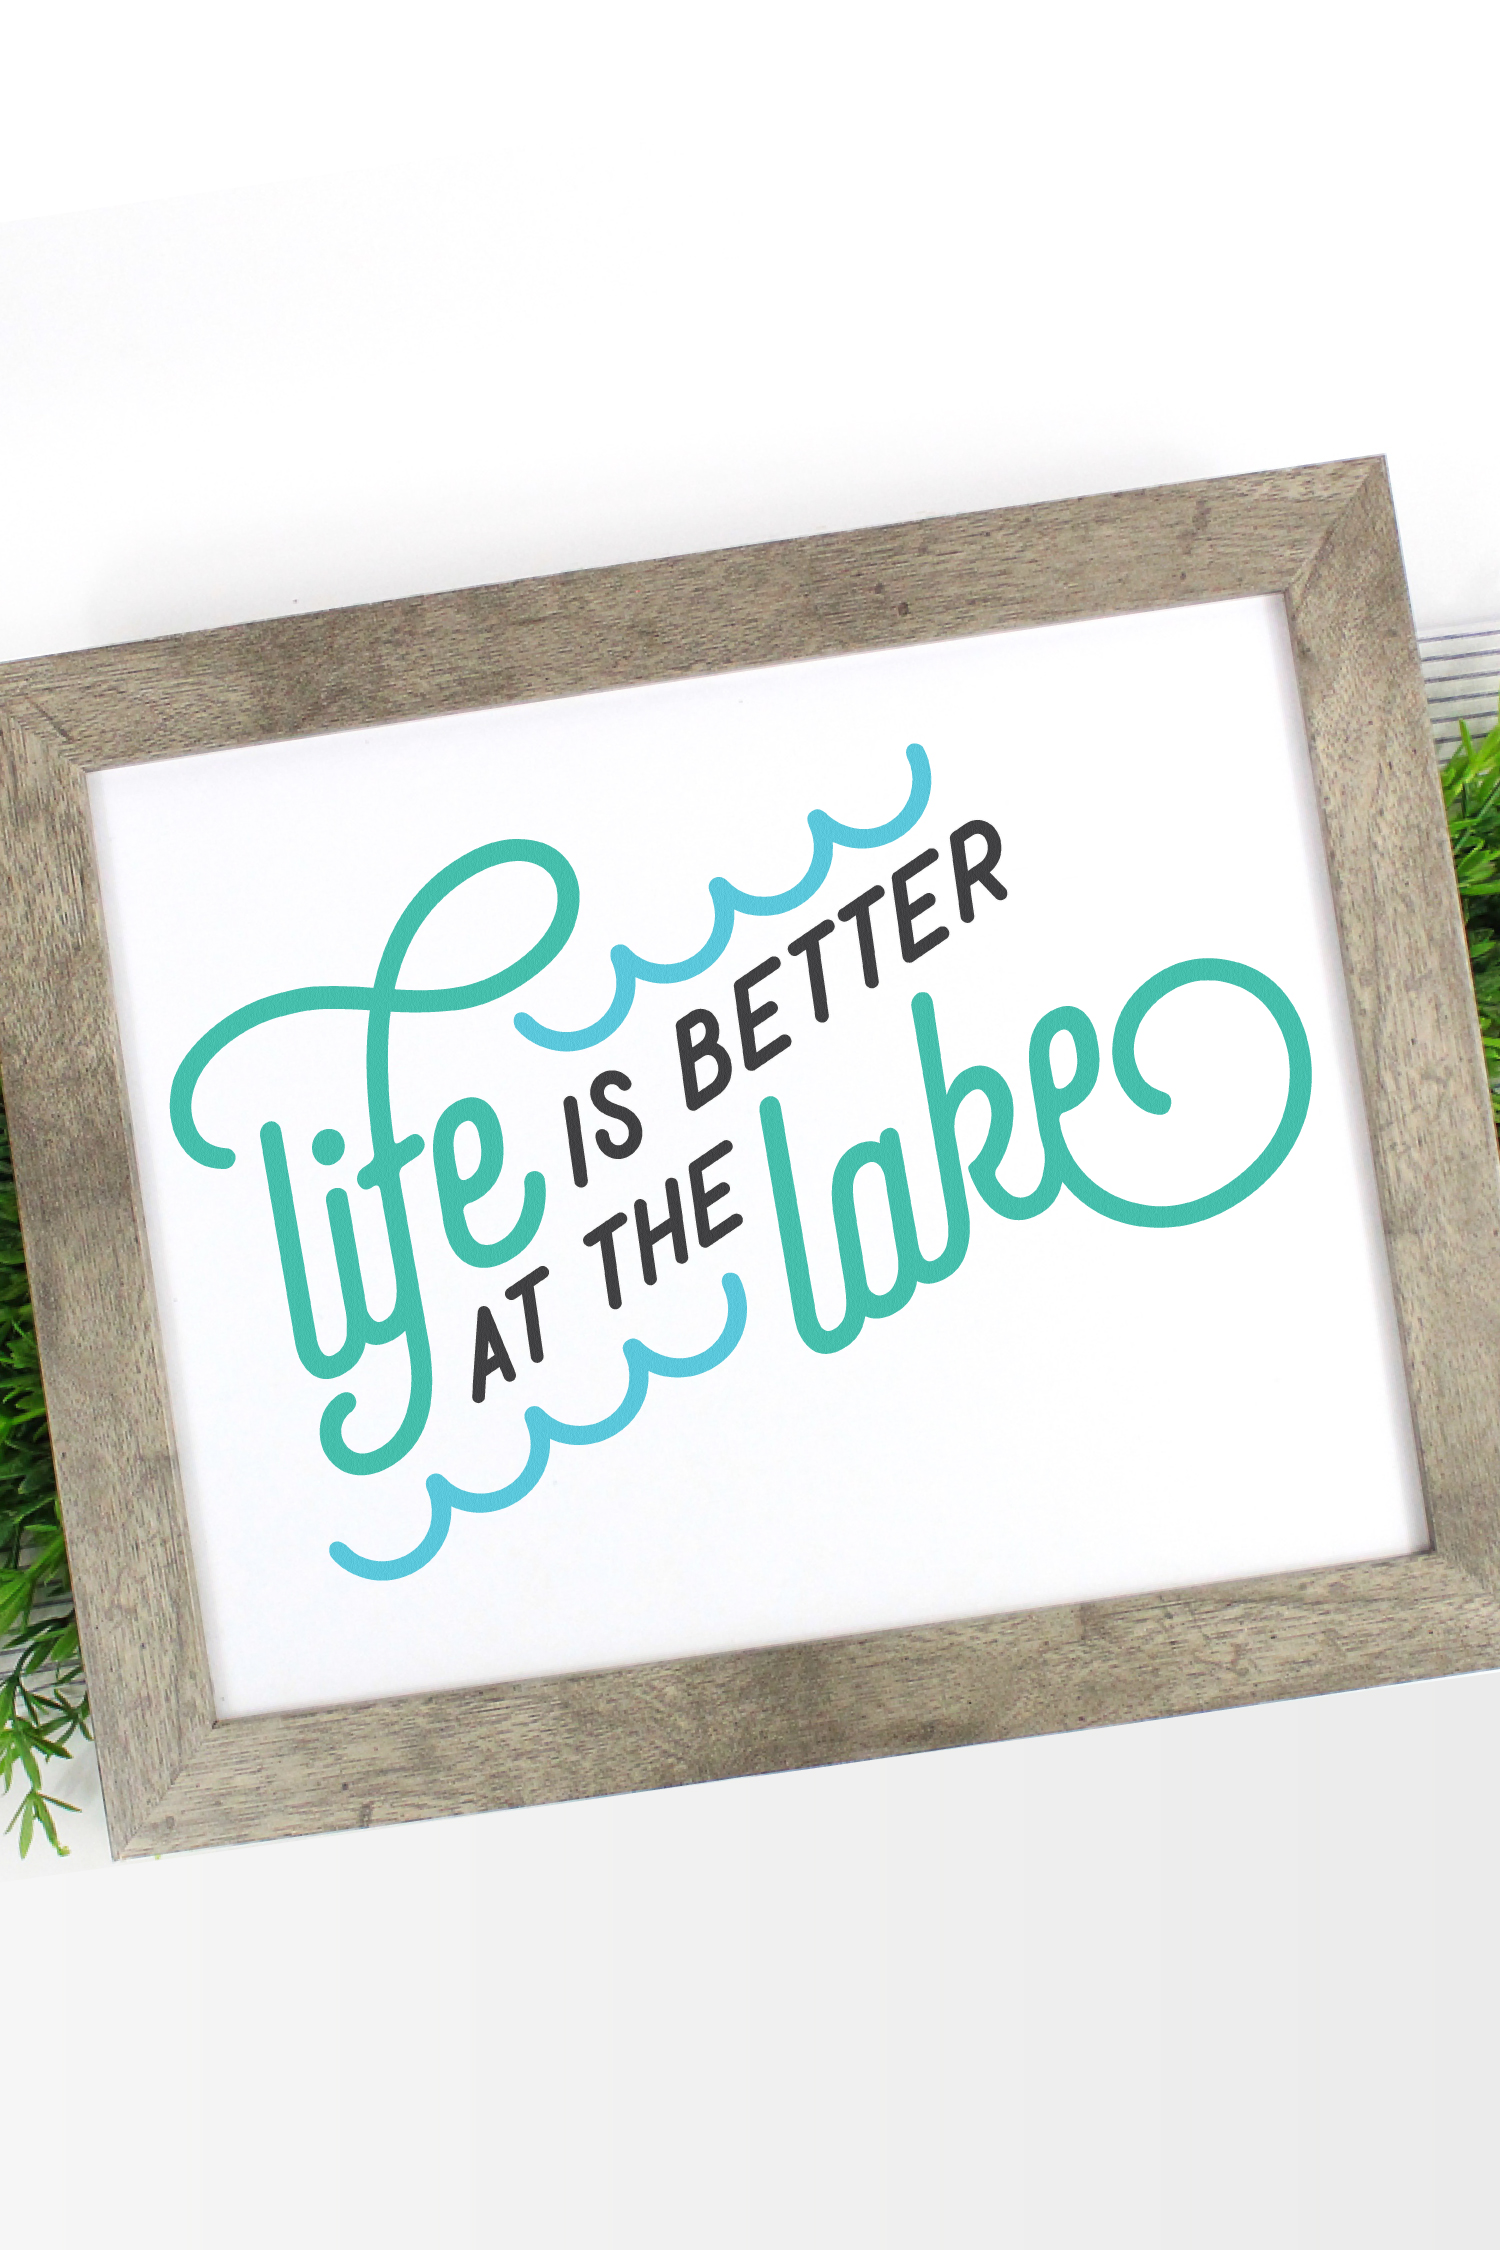 Summer Decor for Your Home or Cottage Easy DIY to print or cut. The best days are at the lake house Printable Room Decor and SVG file